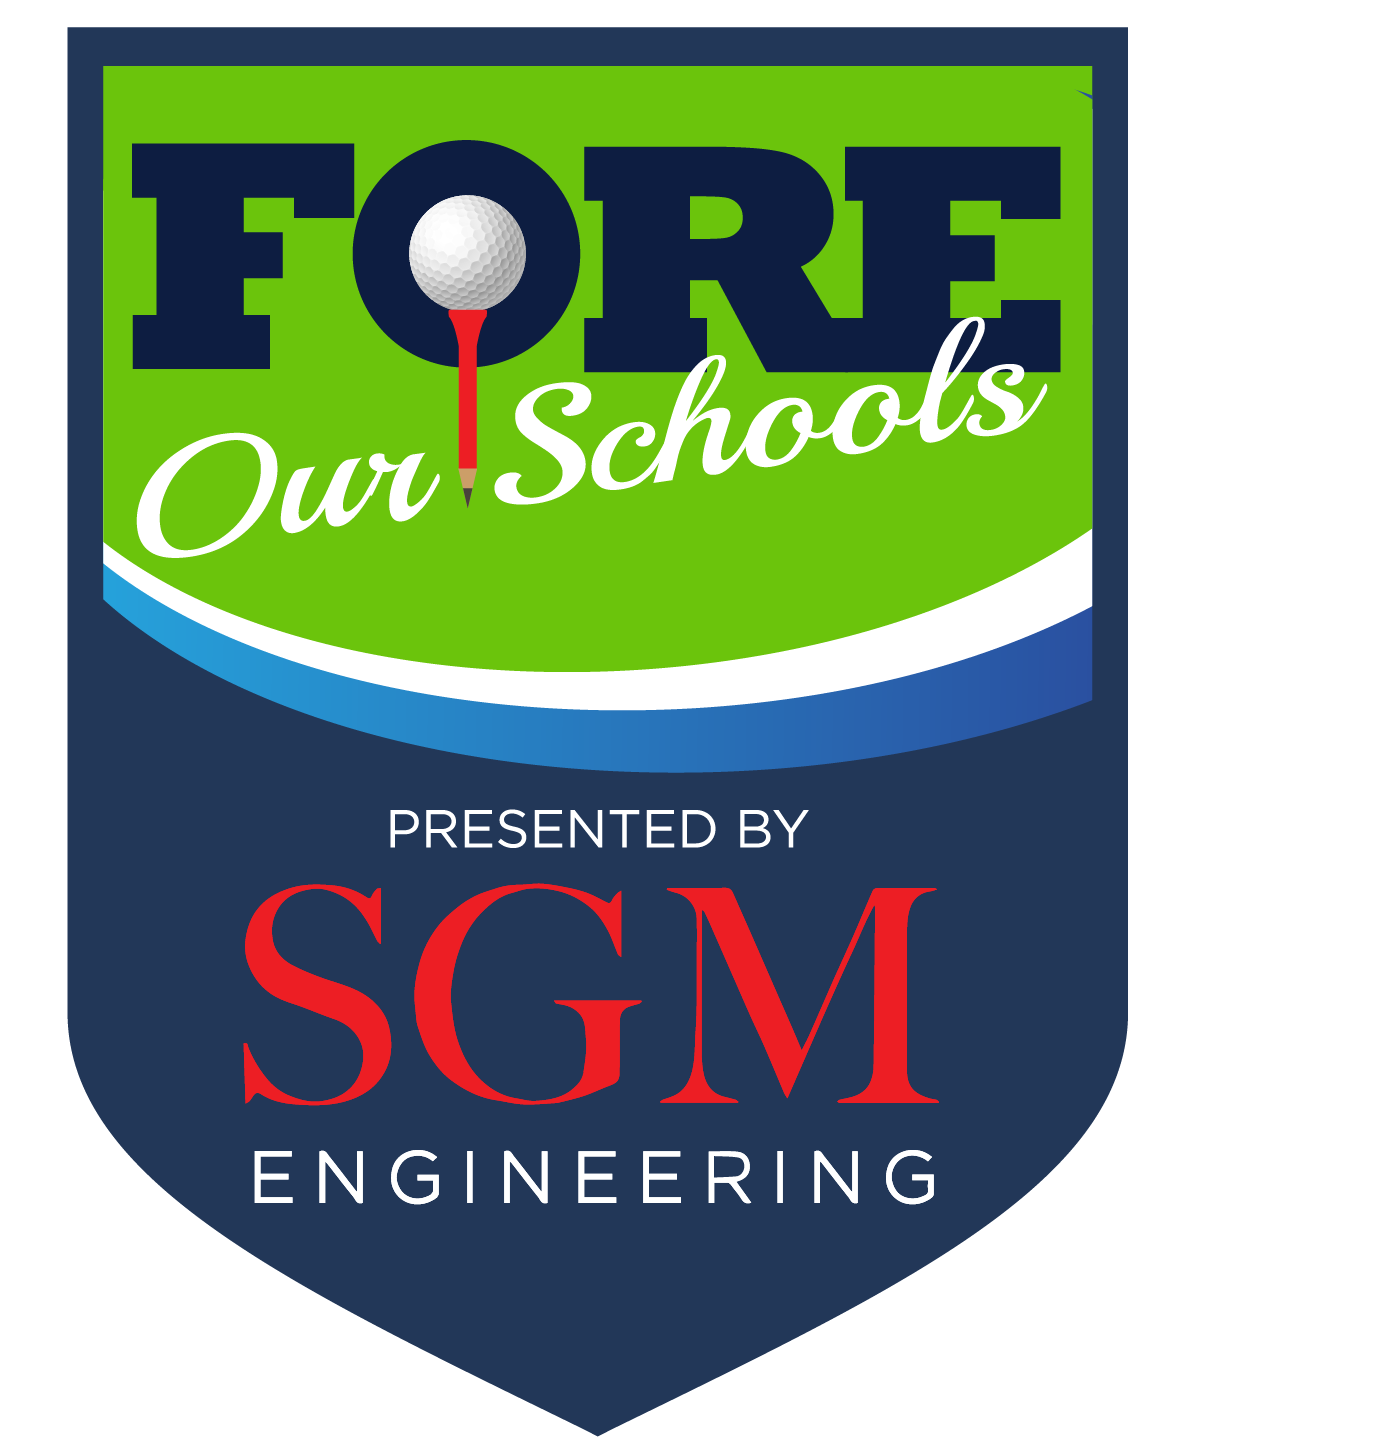 2020 Fore Our Schools Logo 